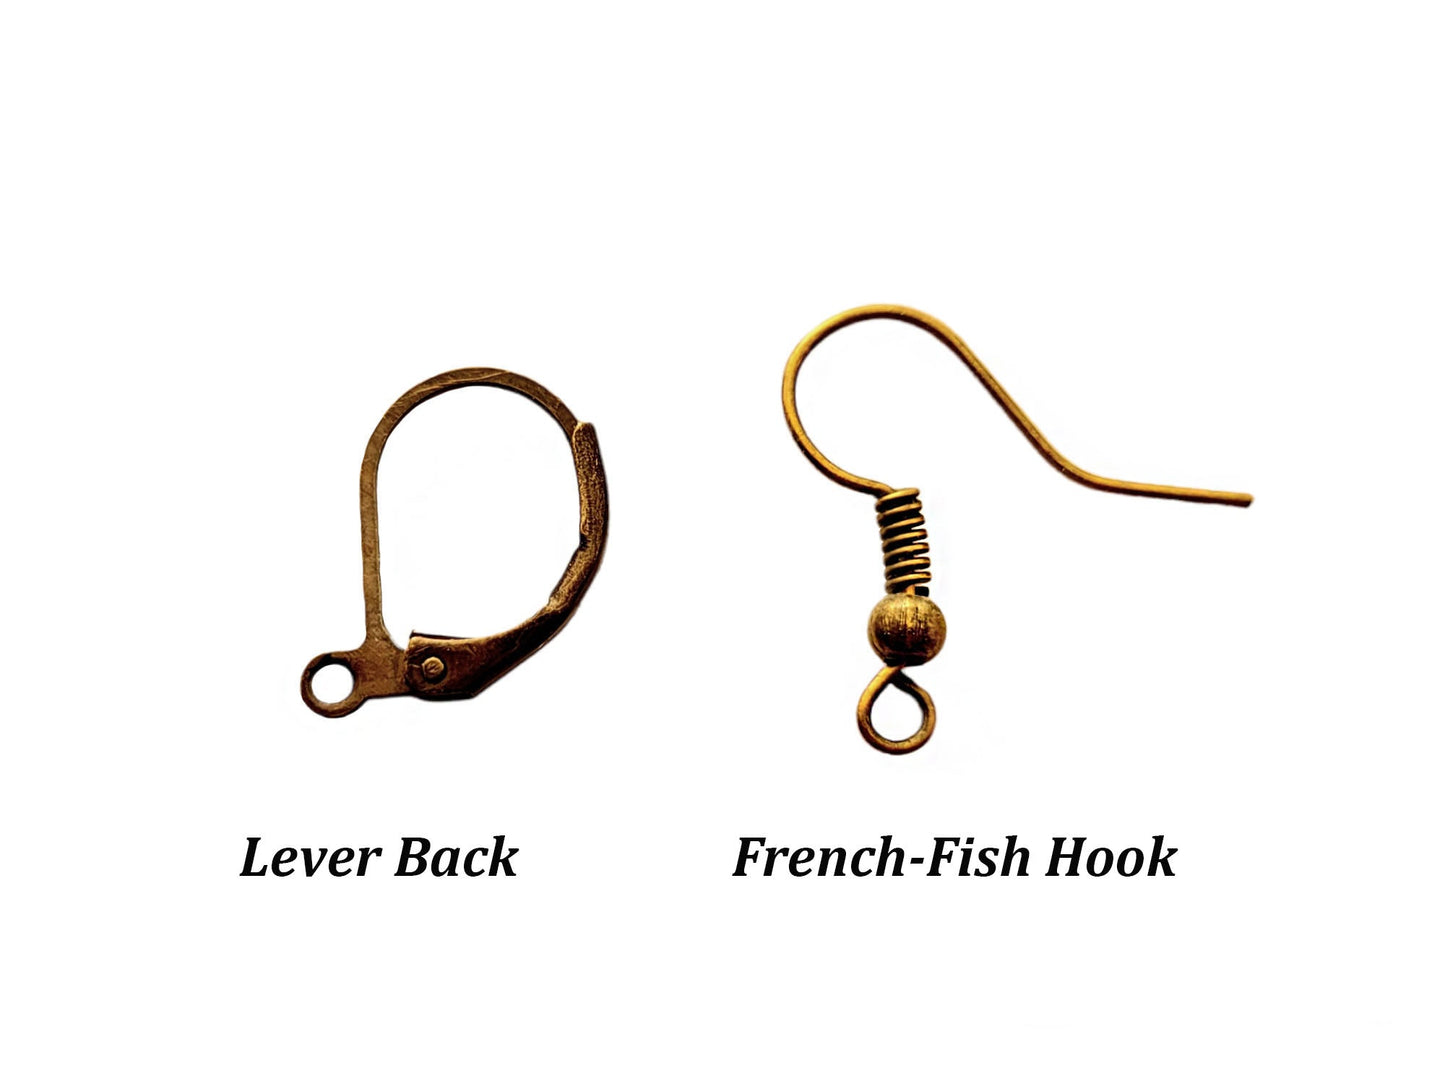 Antqiue Bras Earring Hooks, French/Fish Hooks and Lever Backs